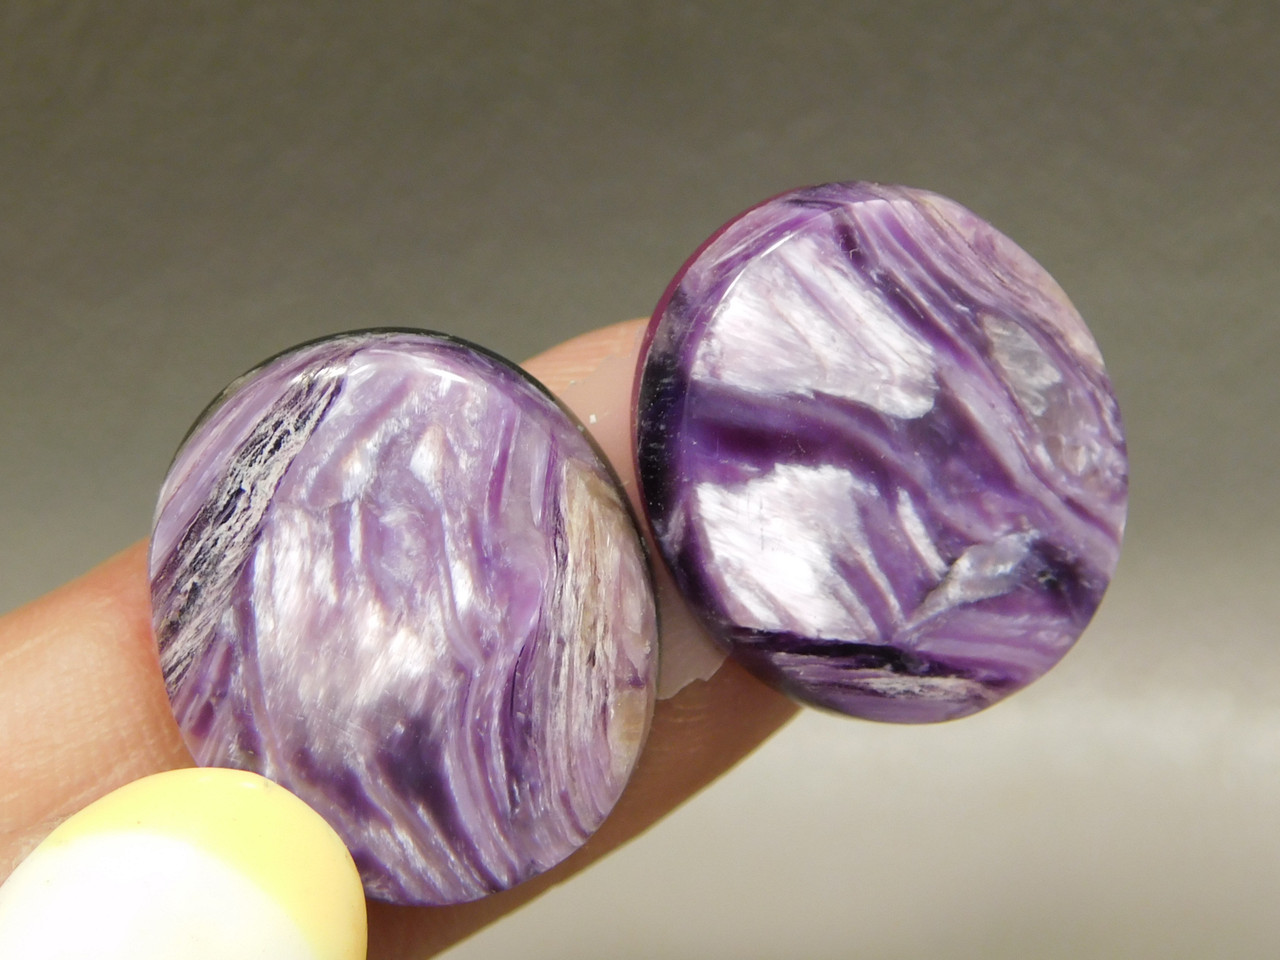 Purple Charoite Chatoyant Cabochons Stones Matched Pairs #13